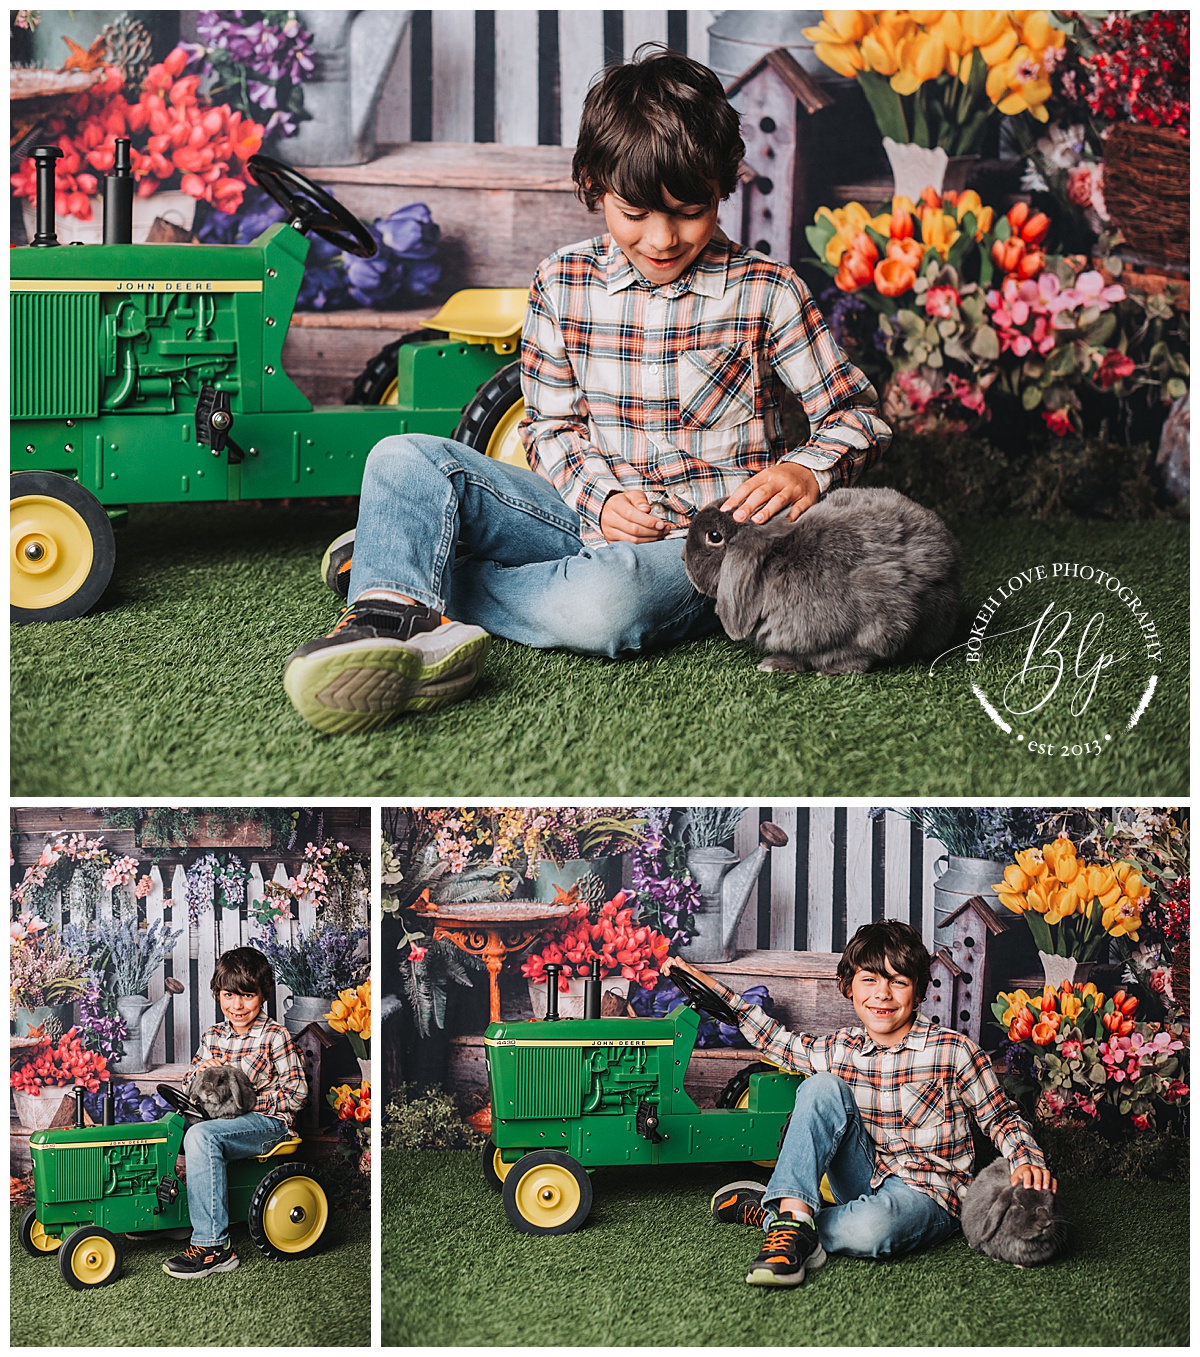 Spring Mini Sessions in Galloway, Bokeh Love Photography, South Jersey Family photographer, boy with gray bunny, boy sitting on tractor in front of spring floral backdrop